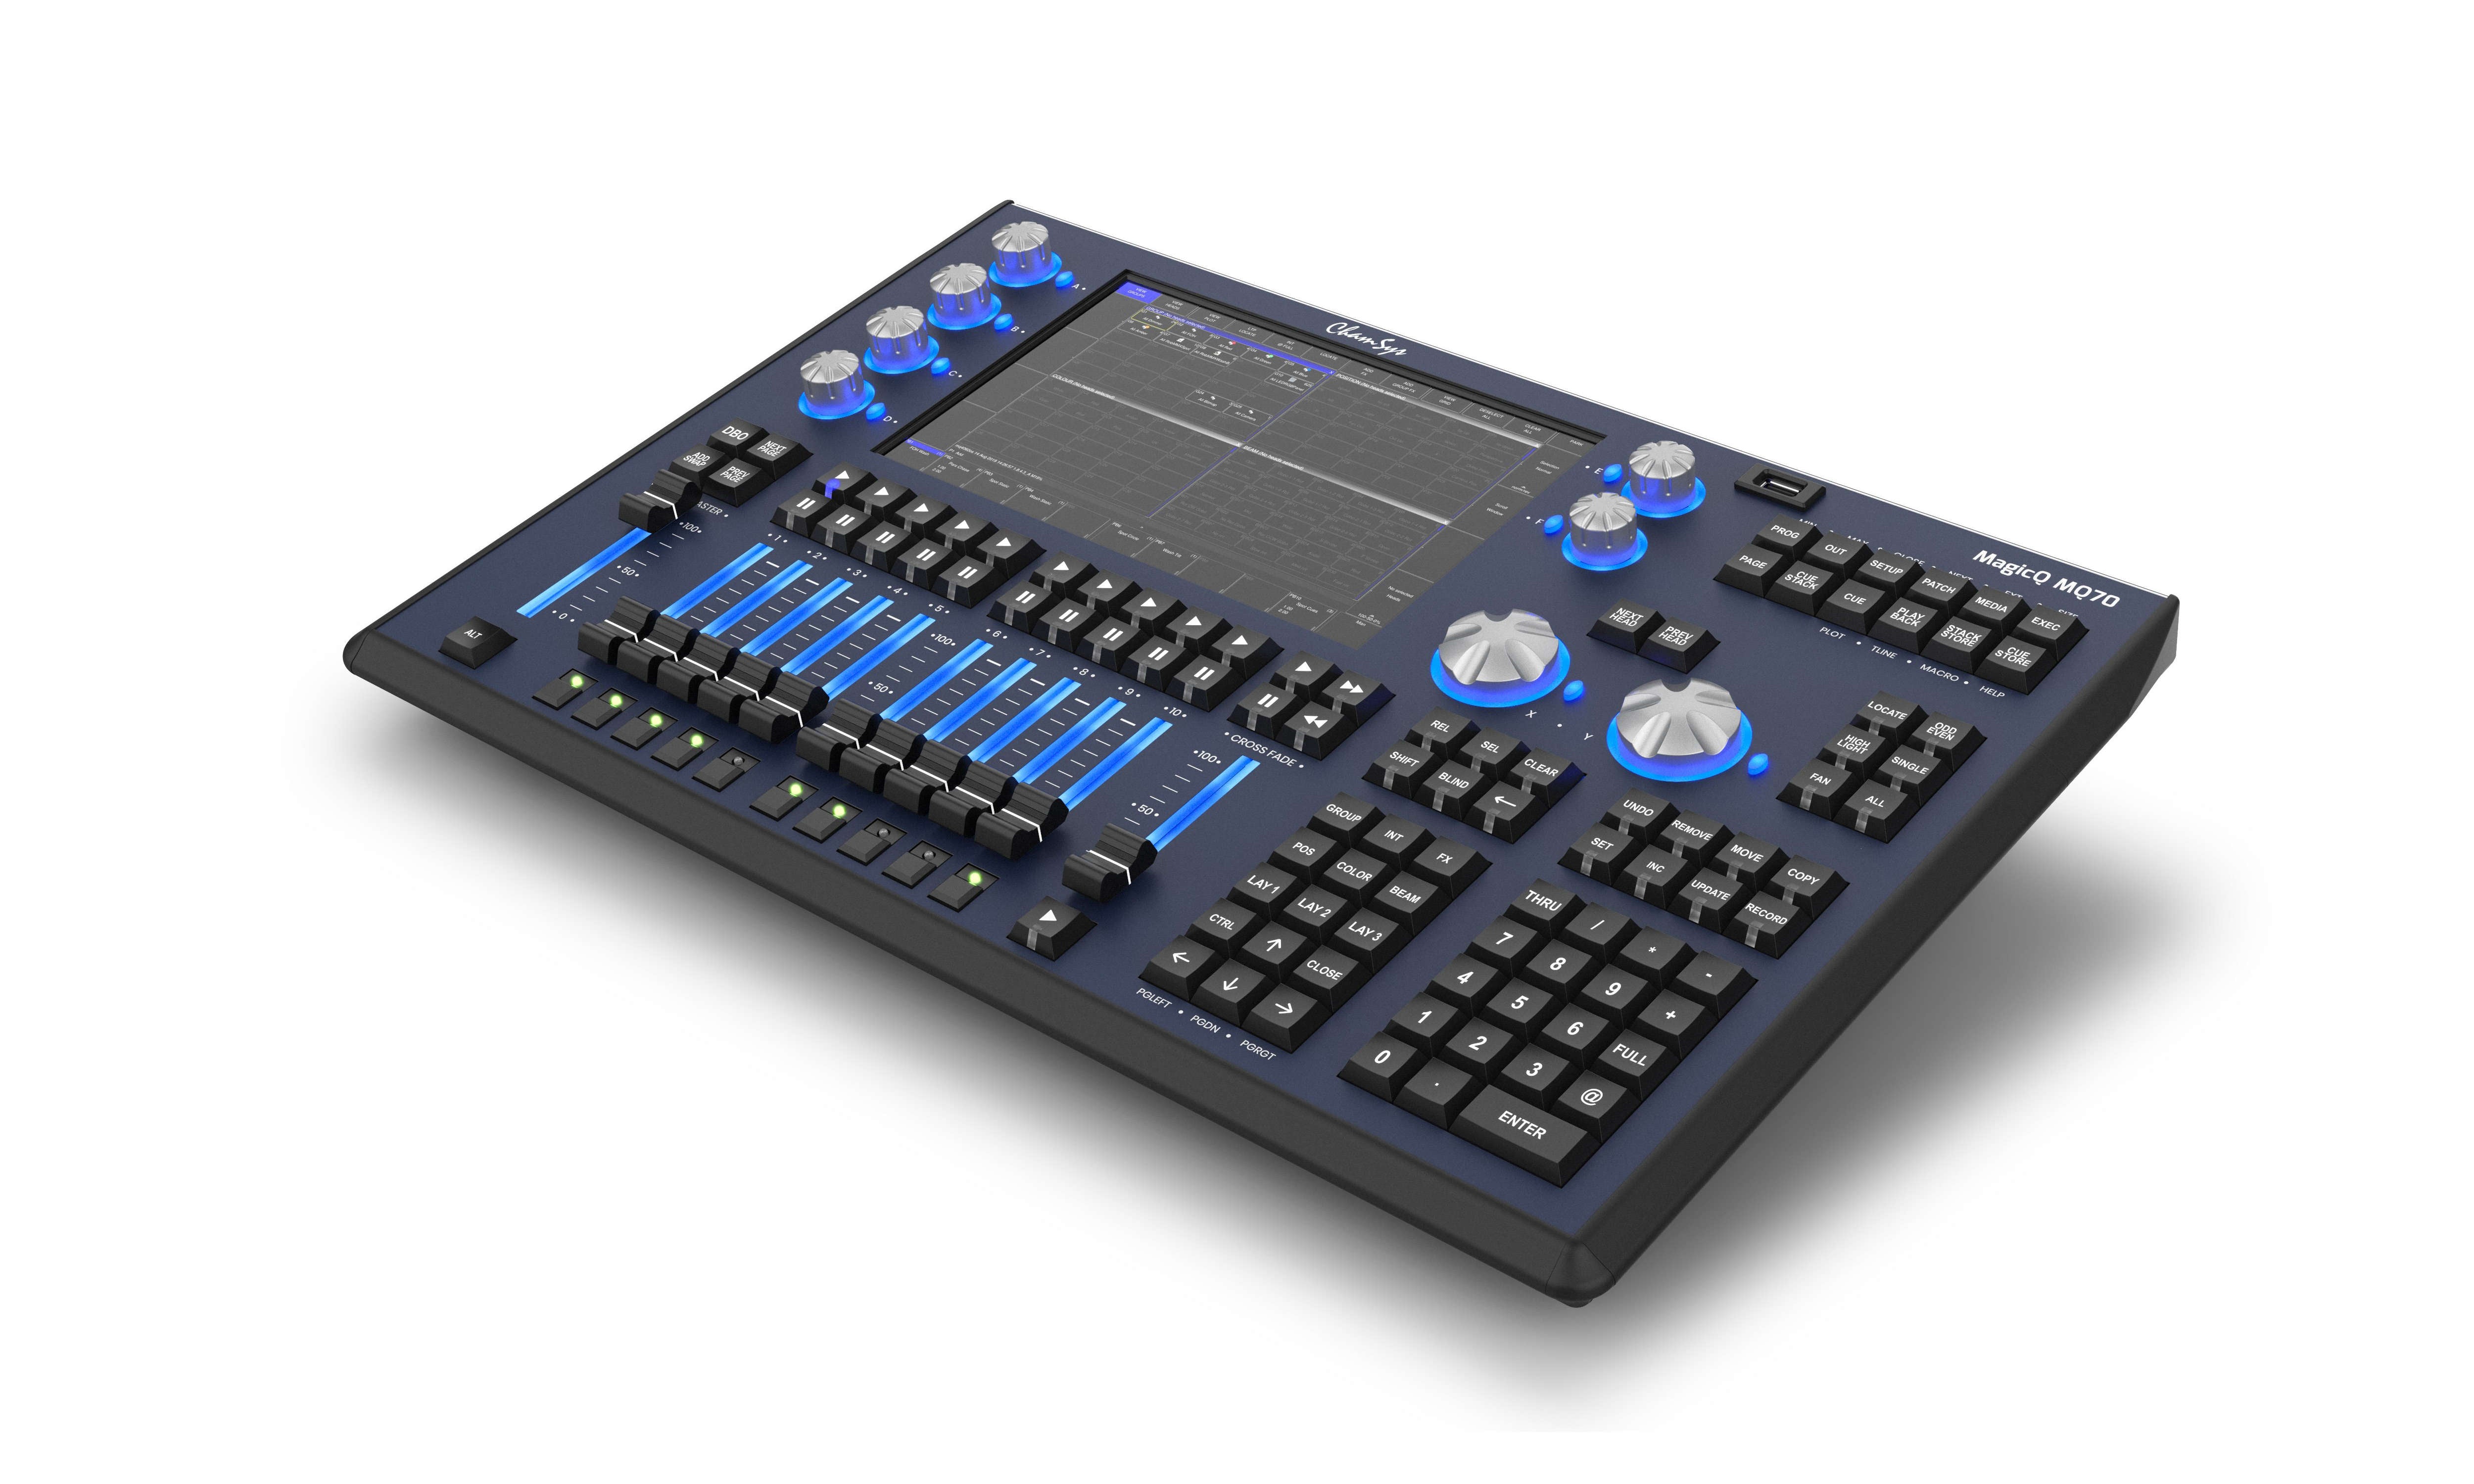 ChamSys MQ70 Compact-sized 24 Universe Lighting Console with 4 DMX Outputs